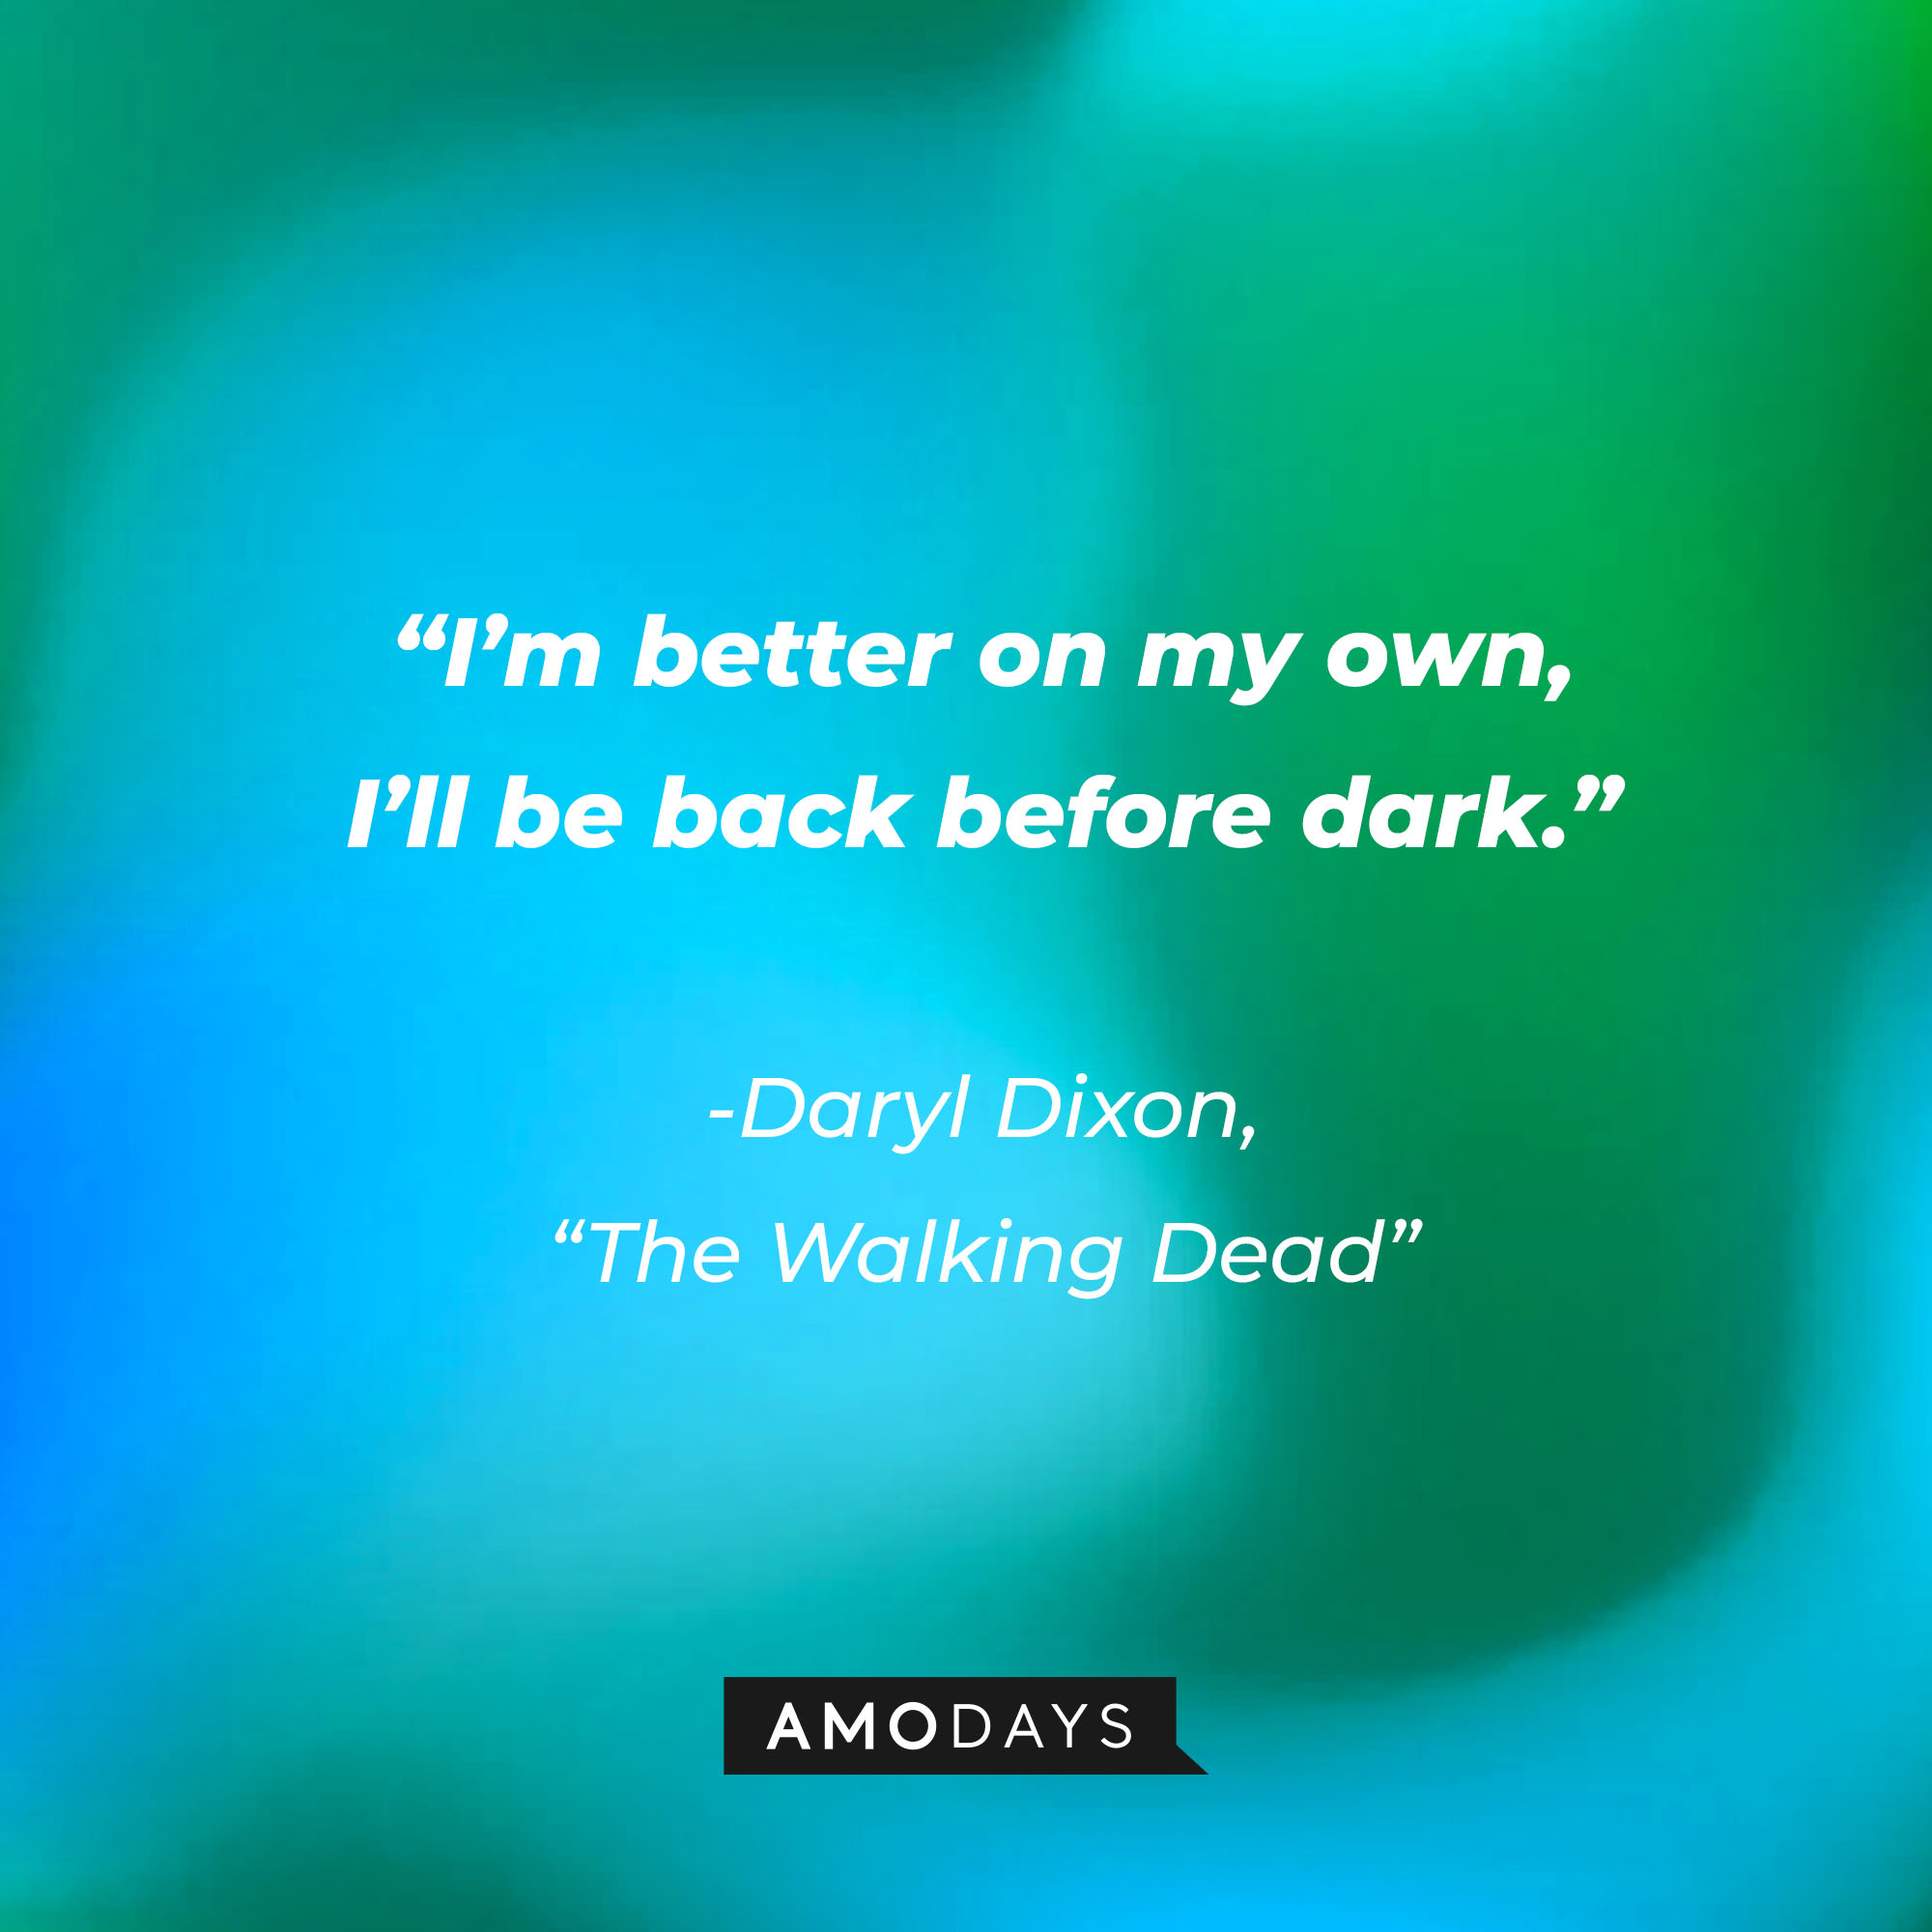 Daryl Dixon’s quote from “The Walking Dead”: “I’m better on my own, I’ll be back before dark.” | Source: AmoDays